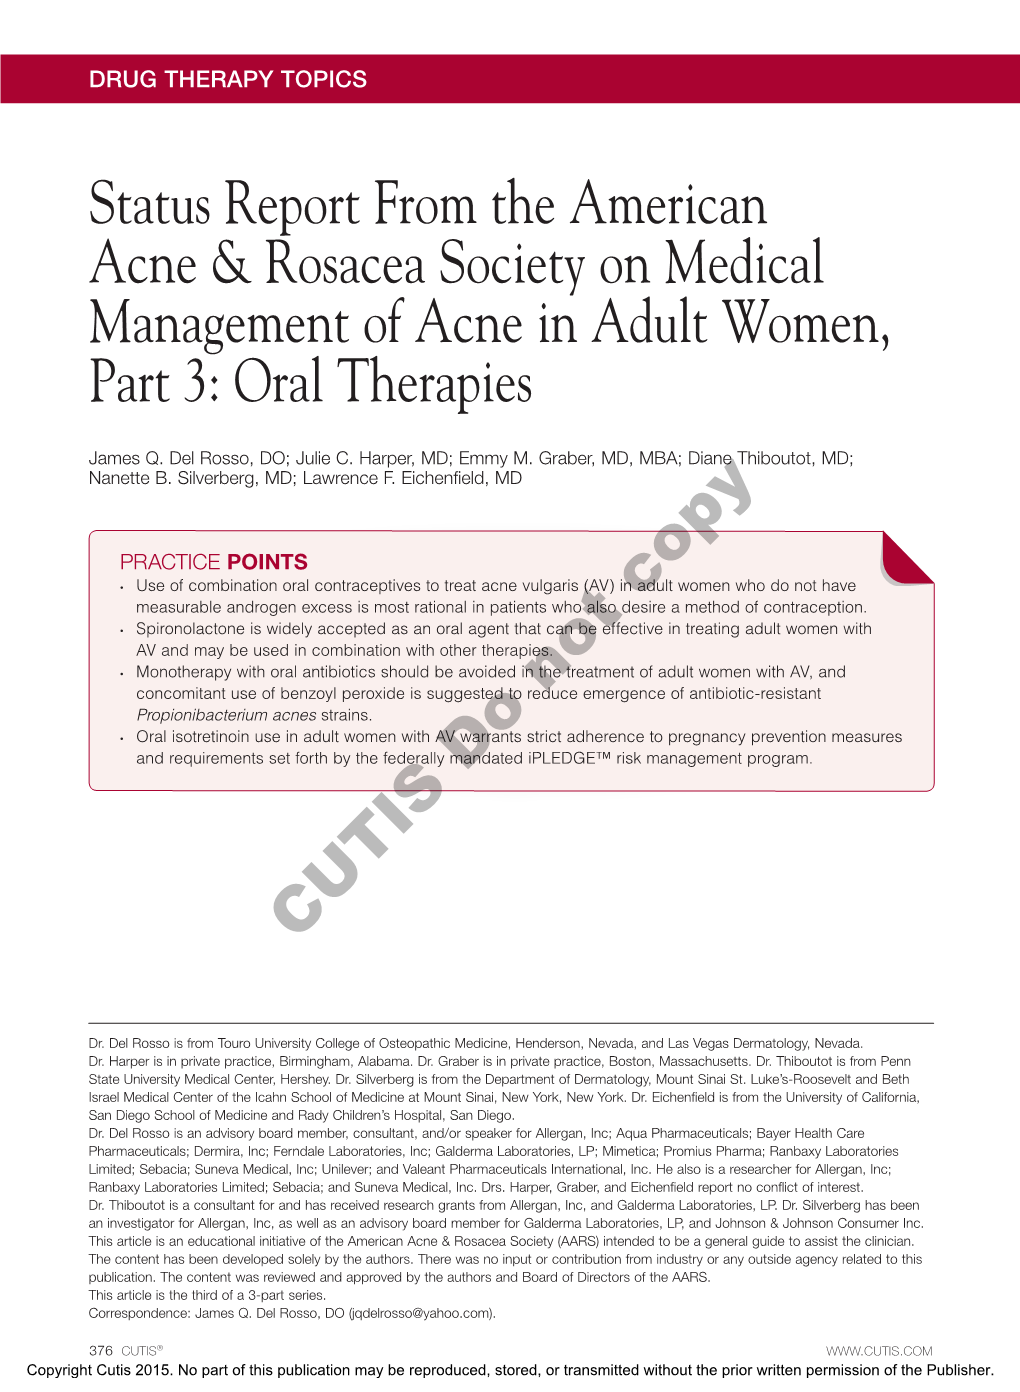 Status Report from the American Acne & Rosacea Society On